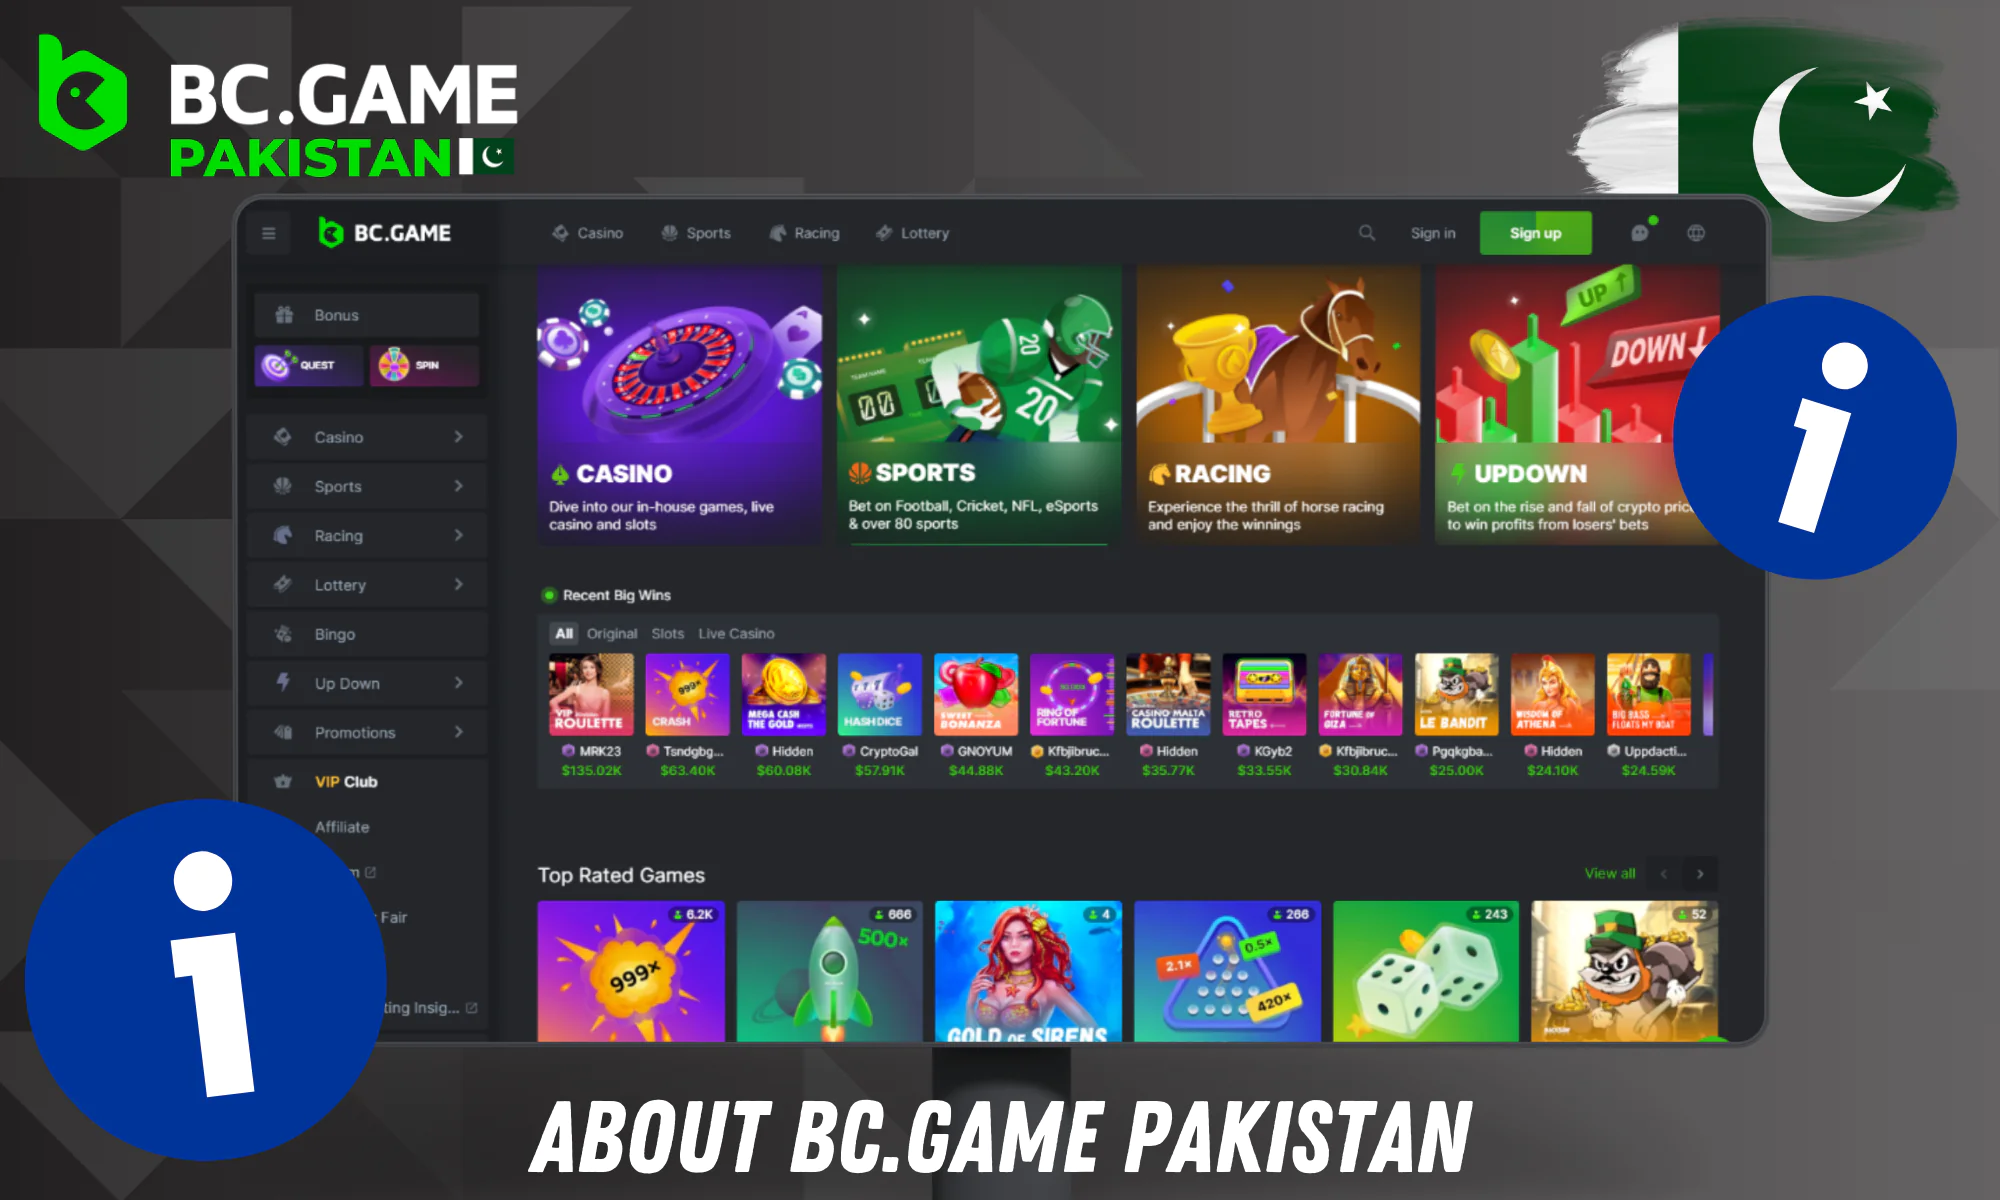 Read more about BC.GAME Pakistan casino